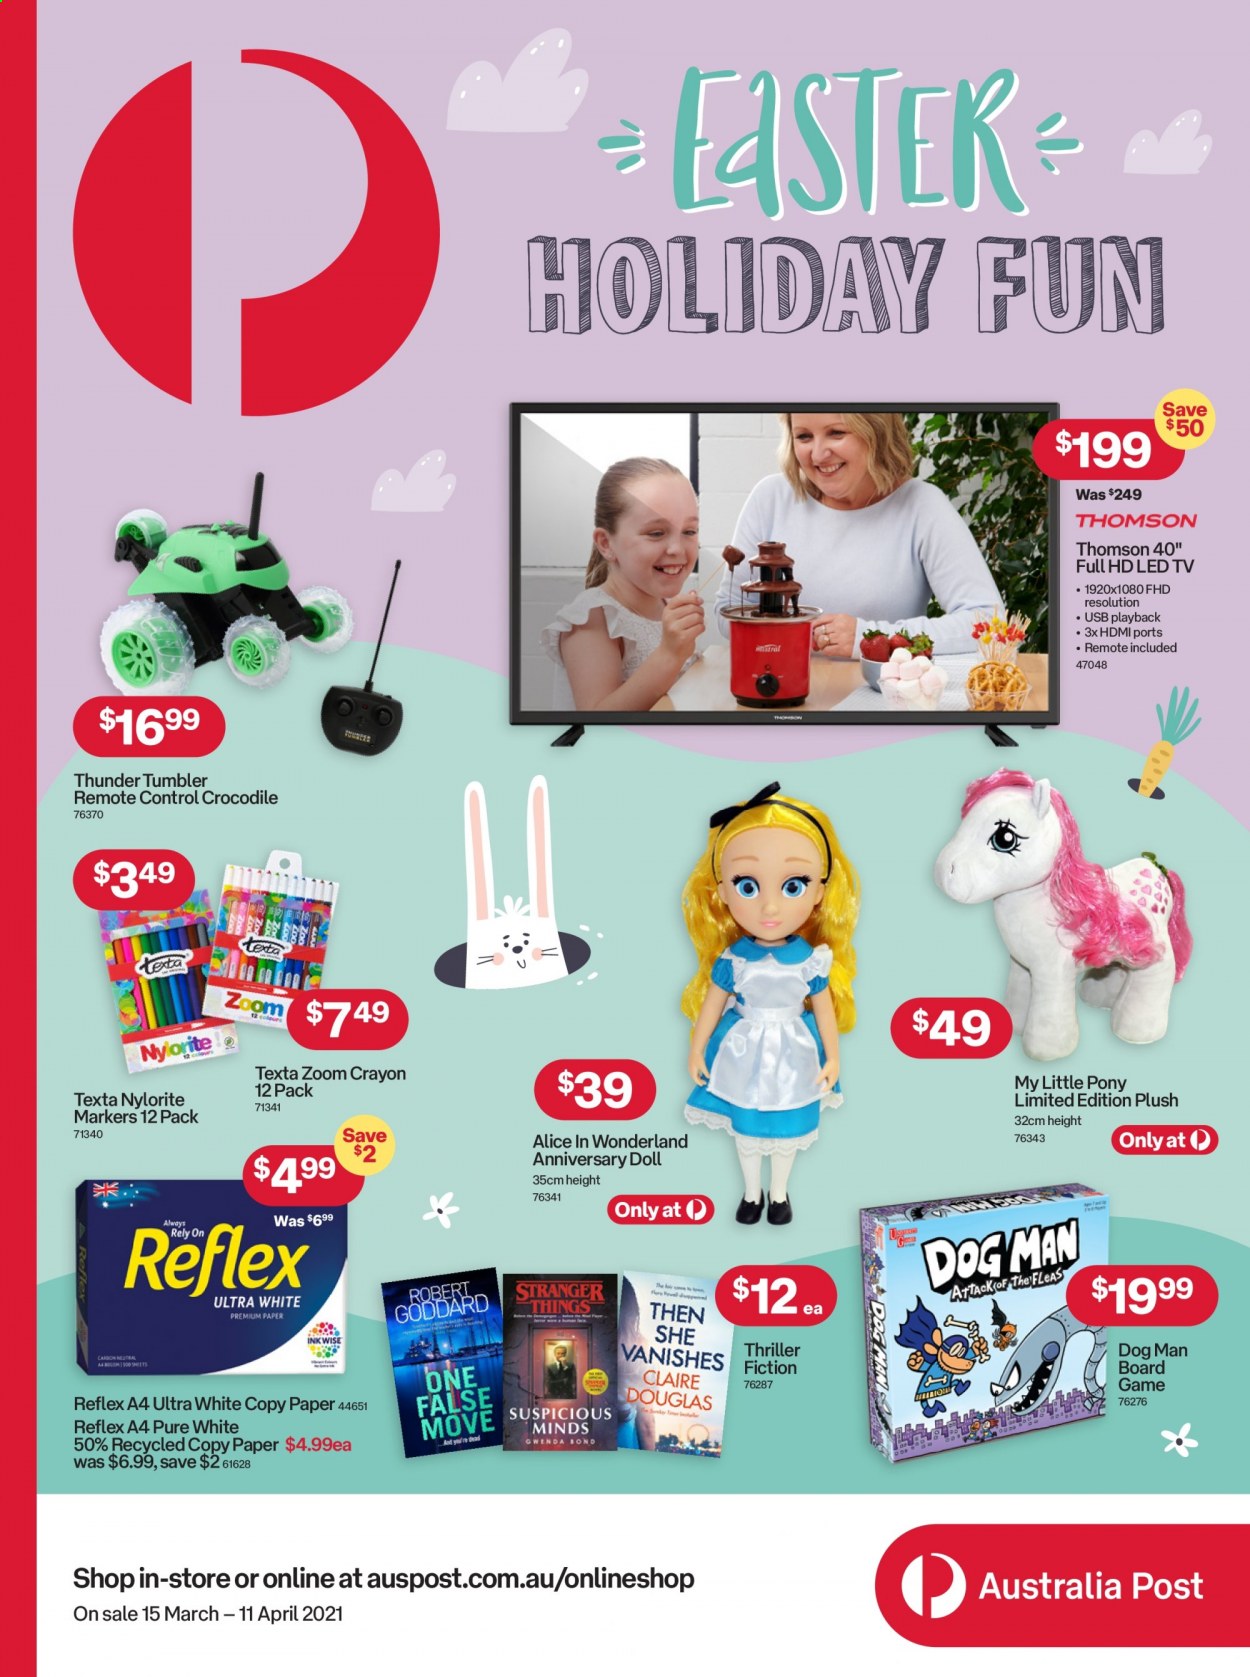 thumbnail - Australia Post Catalogue - 15 Mar 2021 - 11 Apr 2021 - Sales products - tumbler, paper, Thomson, LED TV, TV, remote control, doll, My Little Pony, board game. Page 1.